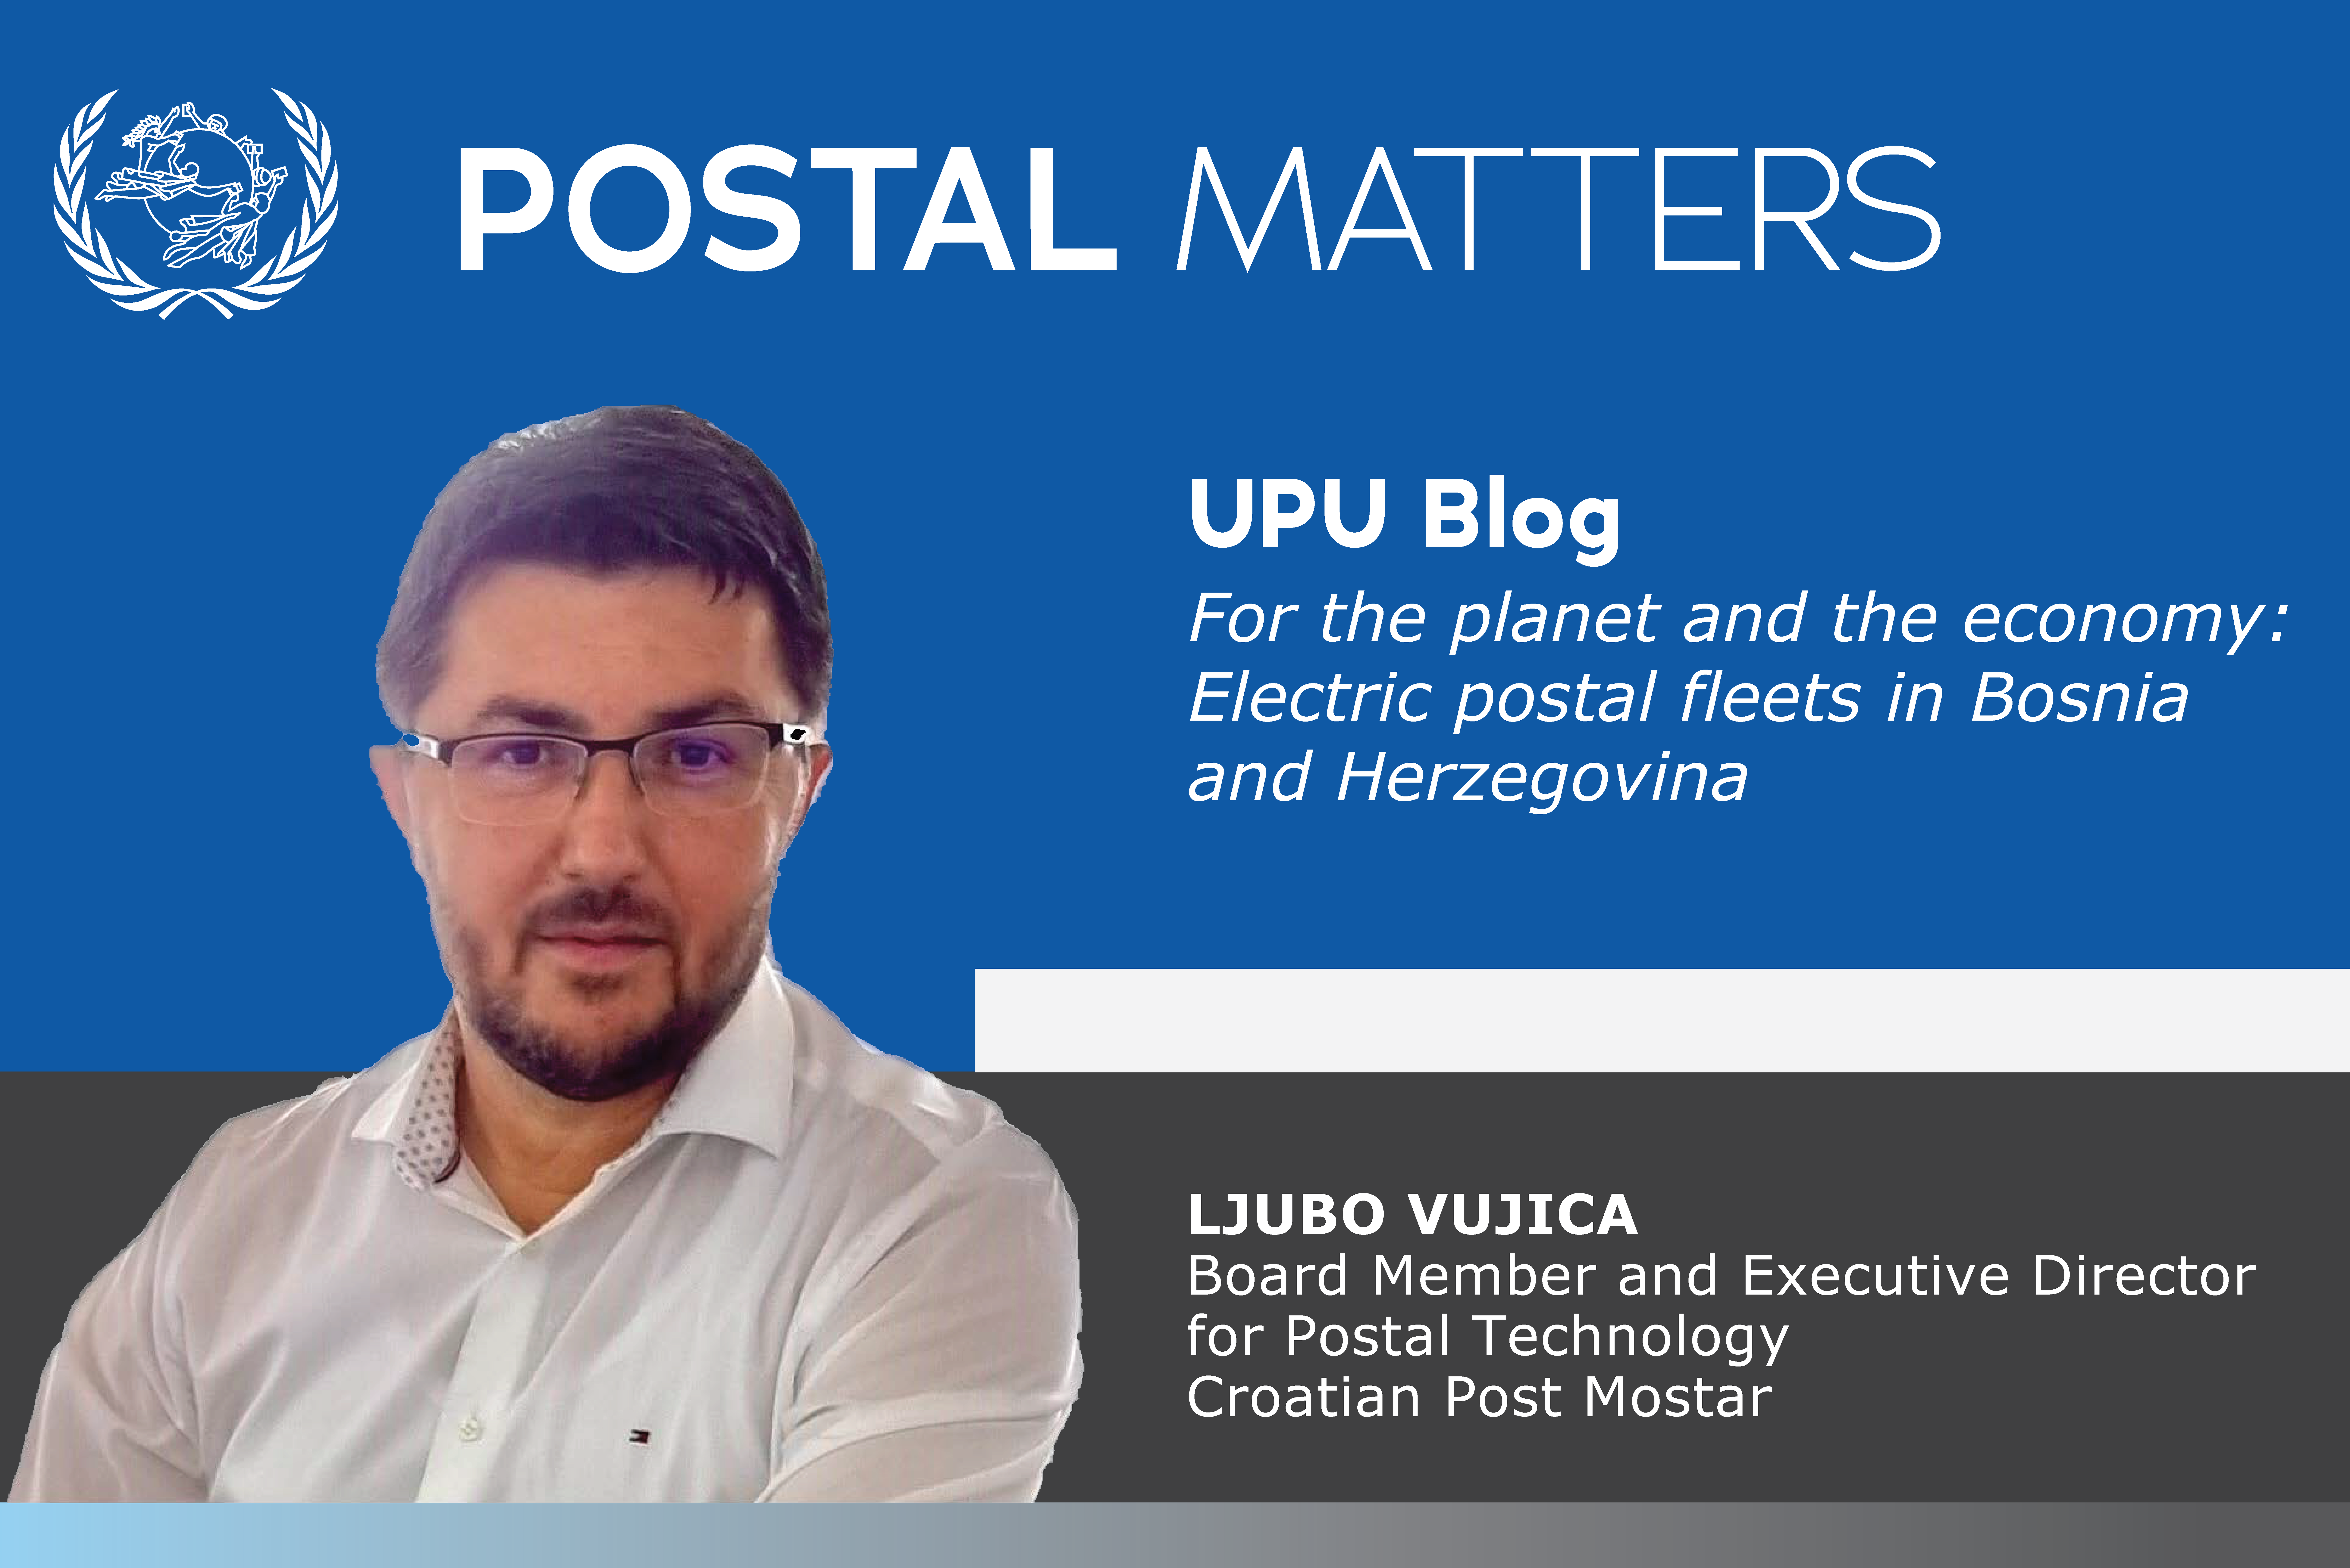 For the planet and the economy: Electric postal fleets in Bosnia and Herzegovina